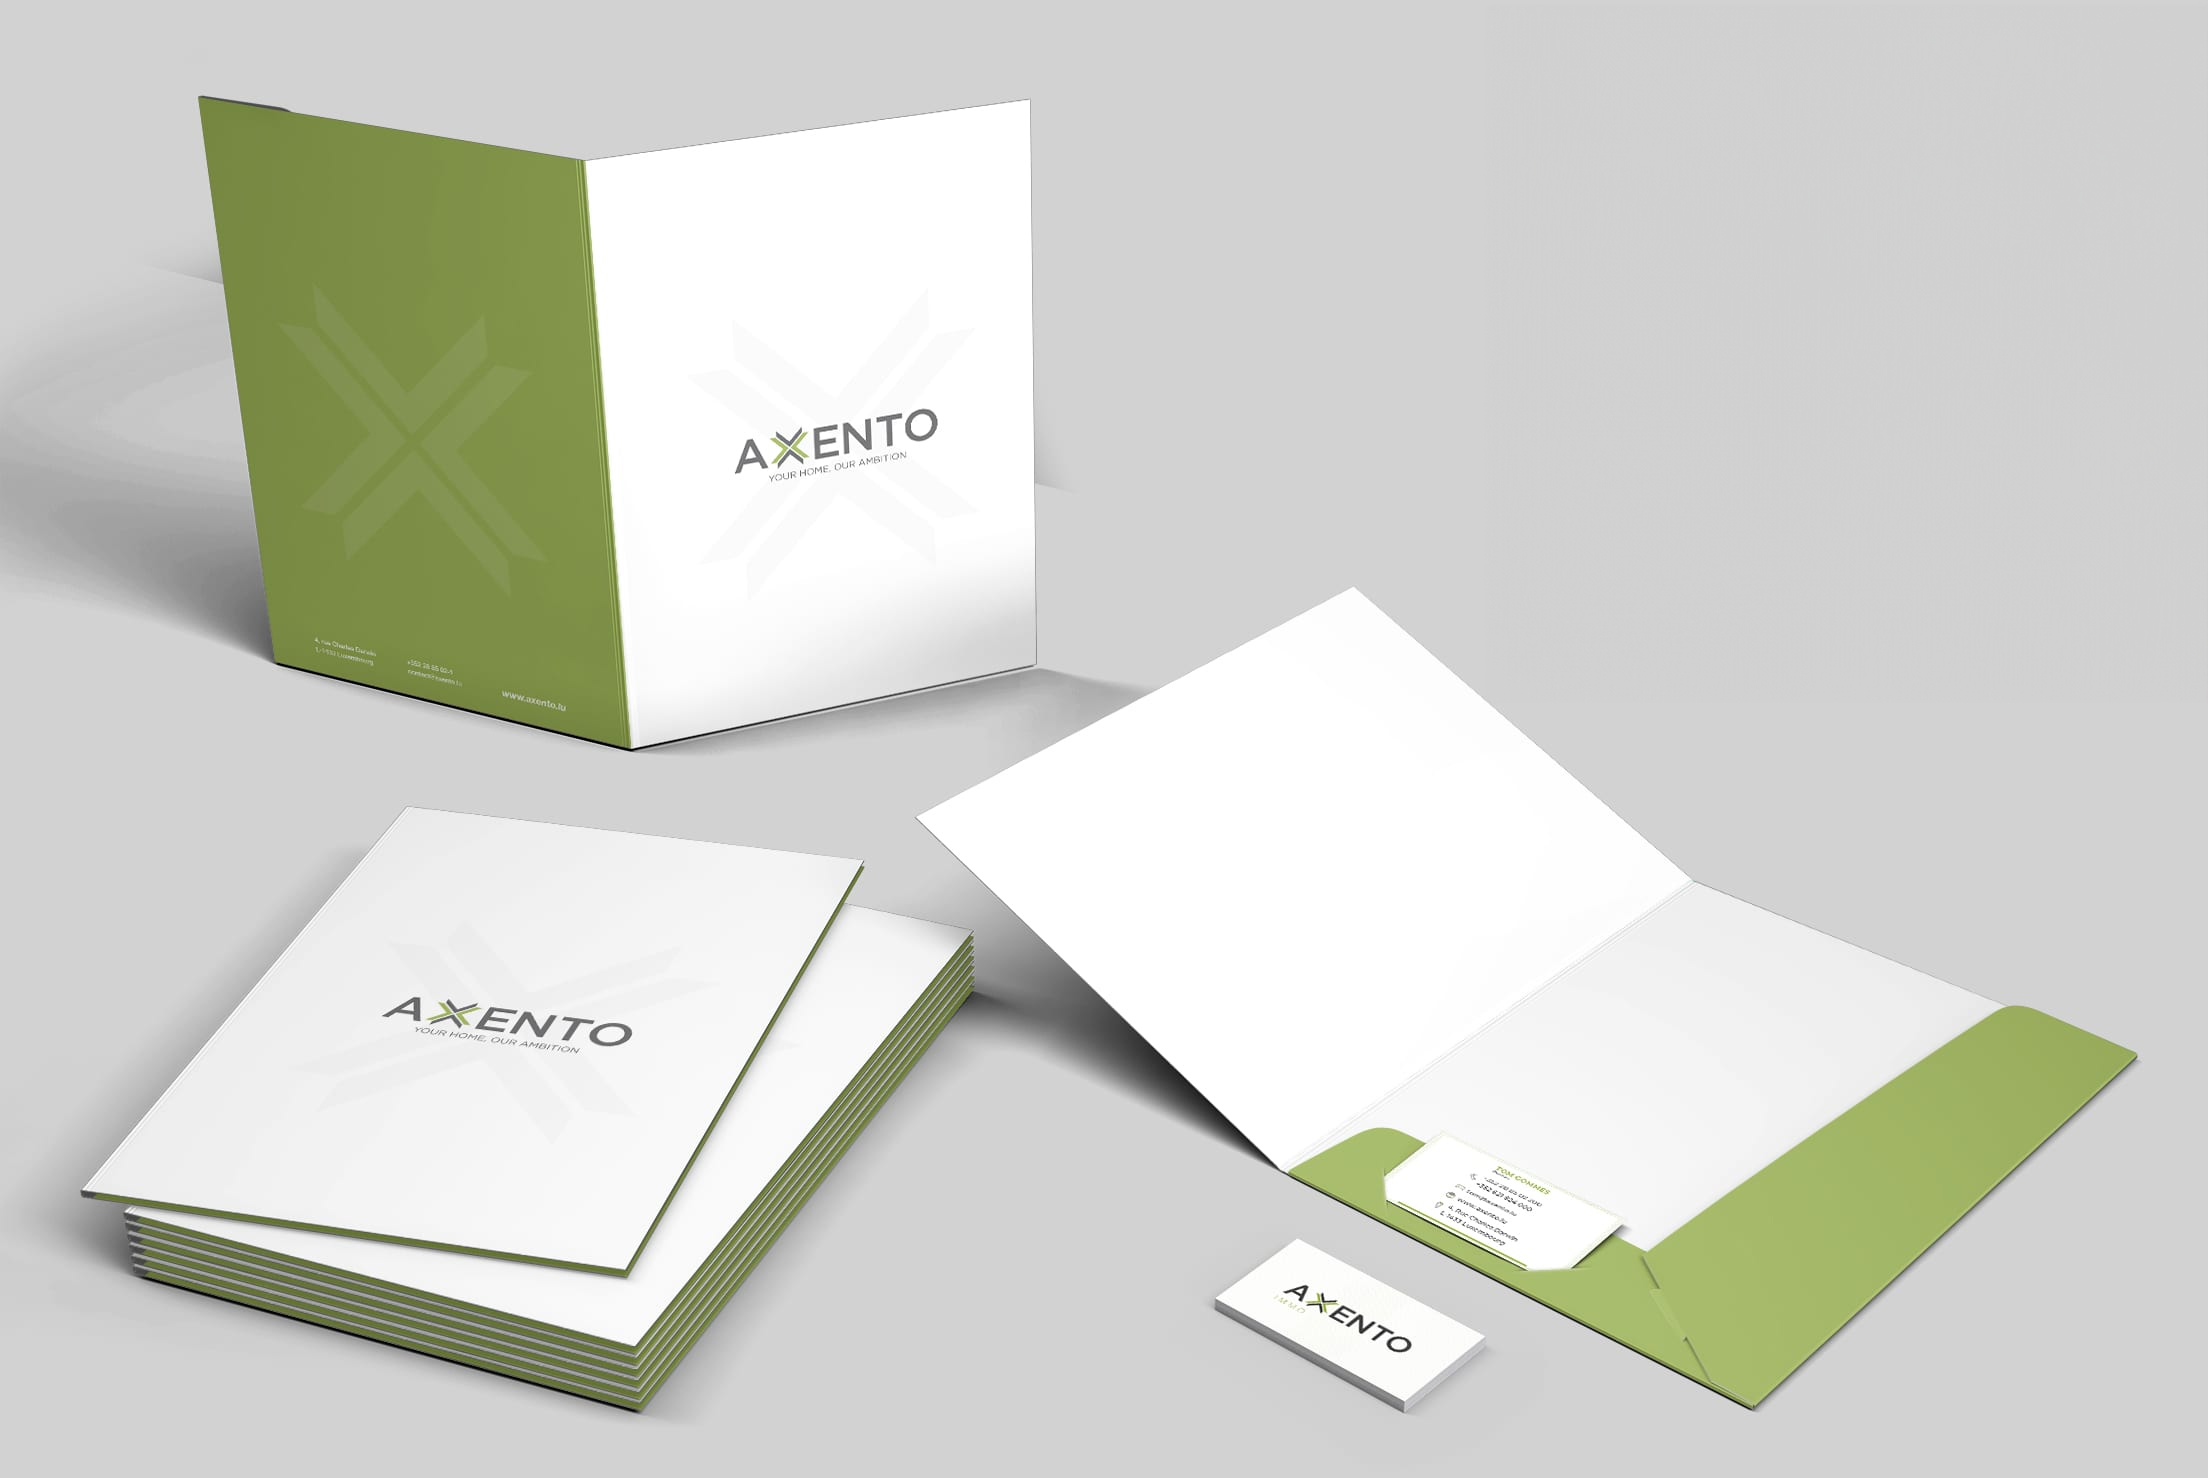 Axento business cards and folders